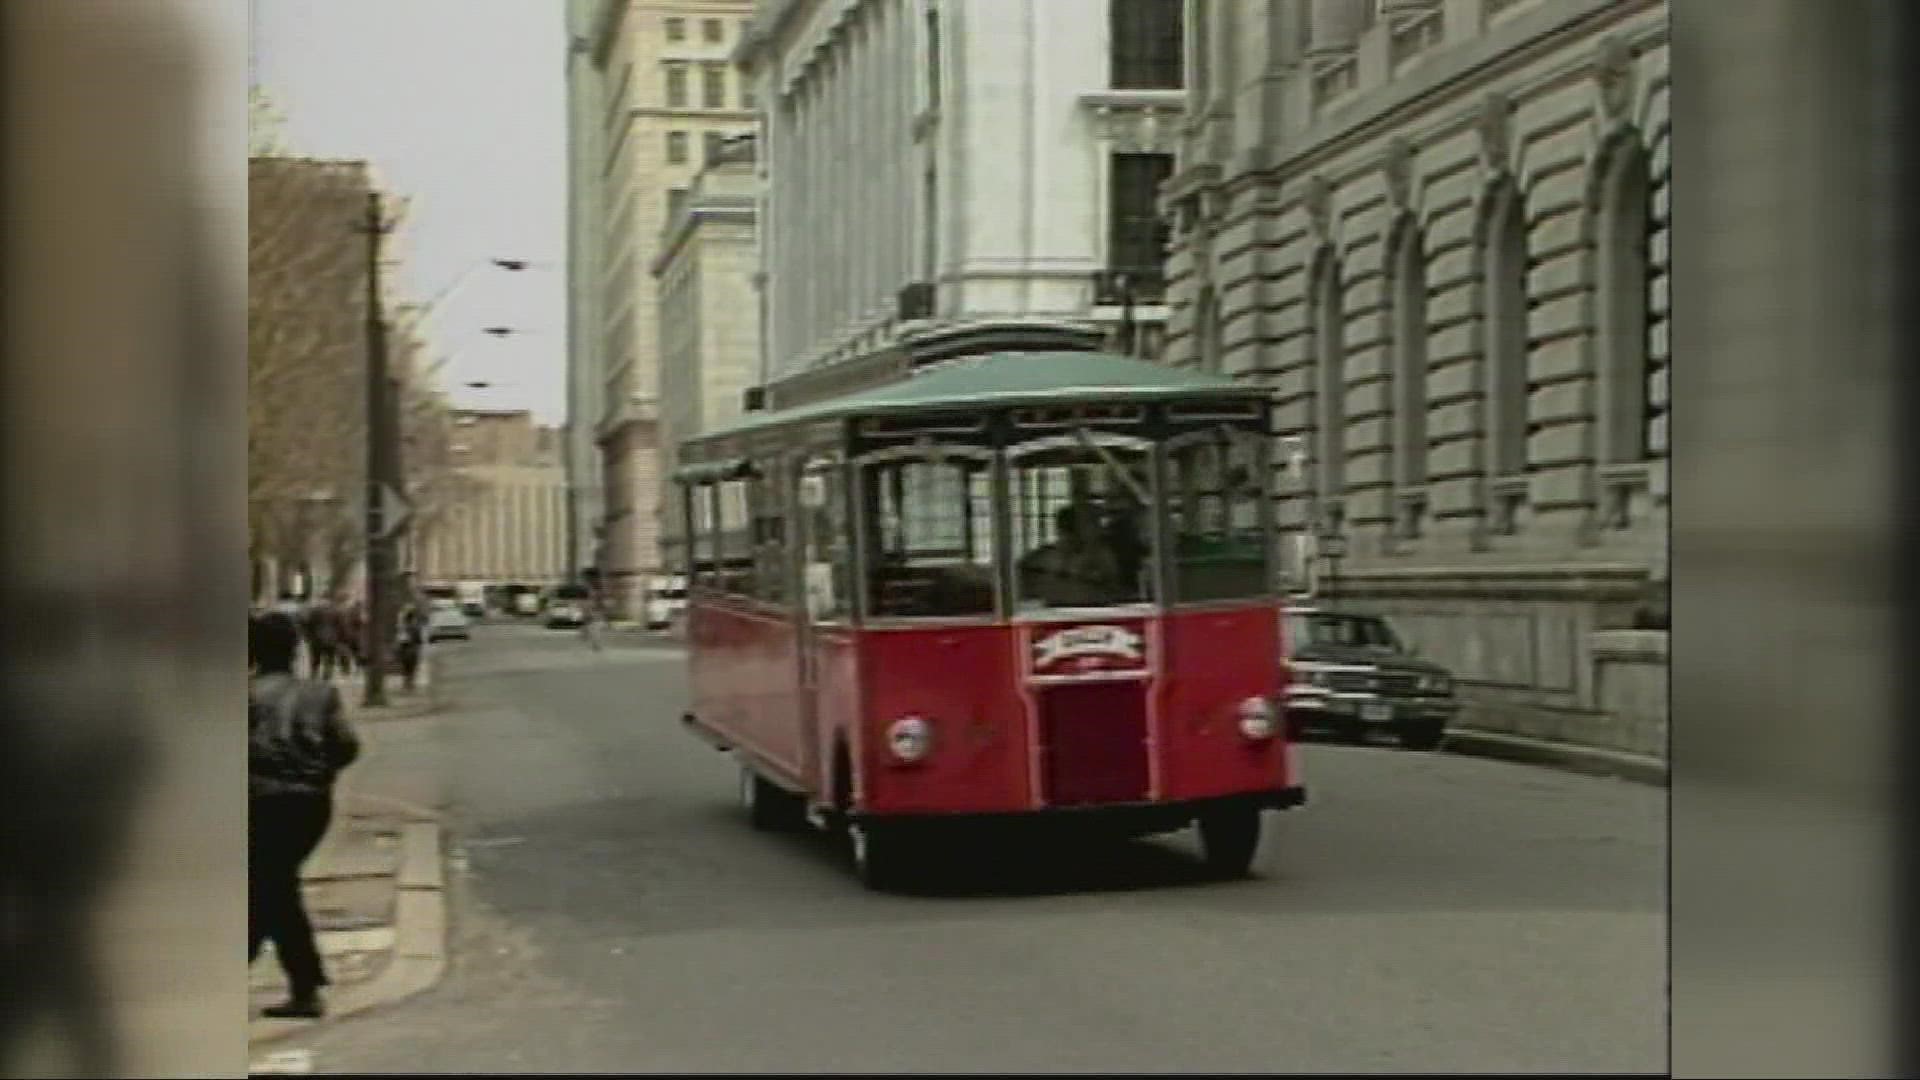 According to the company, the trolleys served more than 2.5 million people during their run.